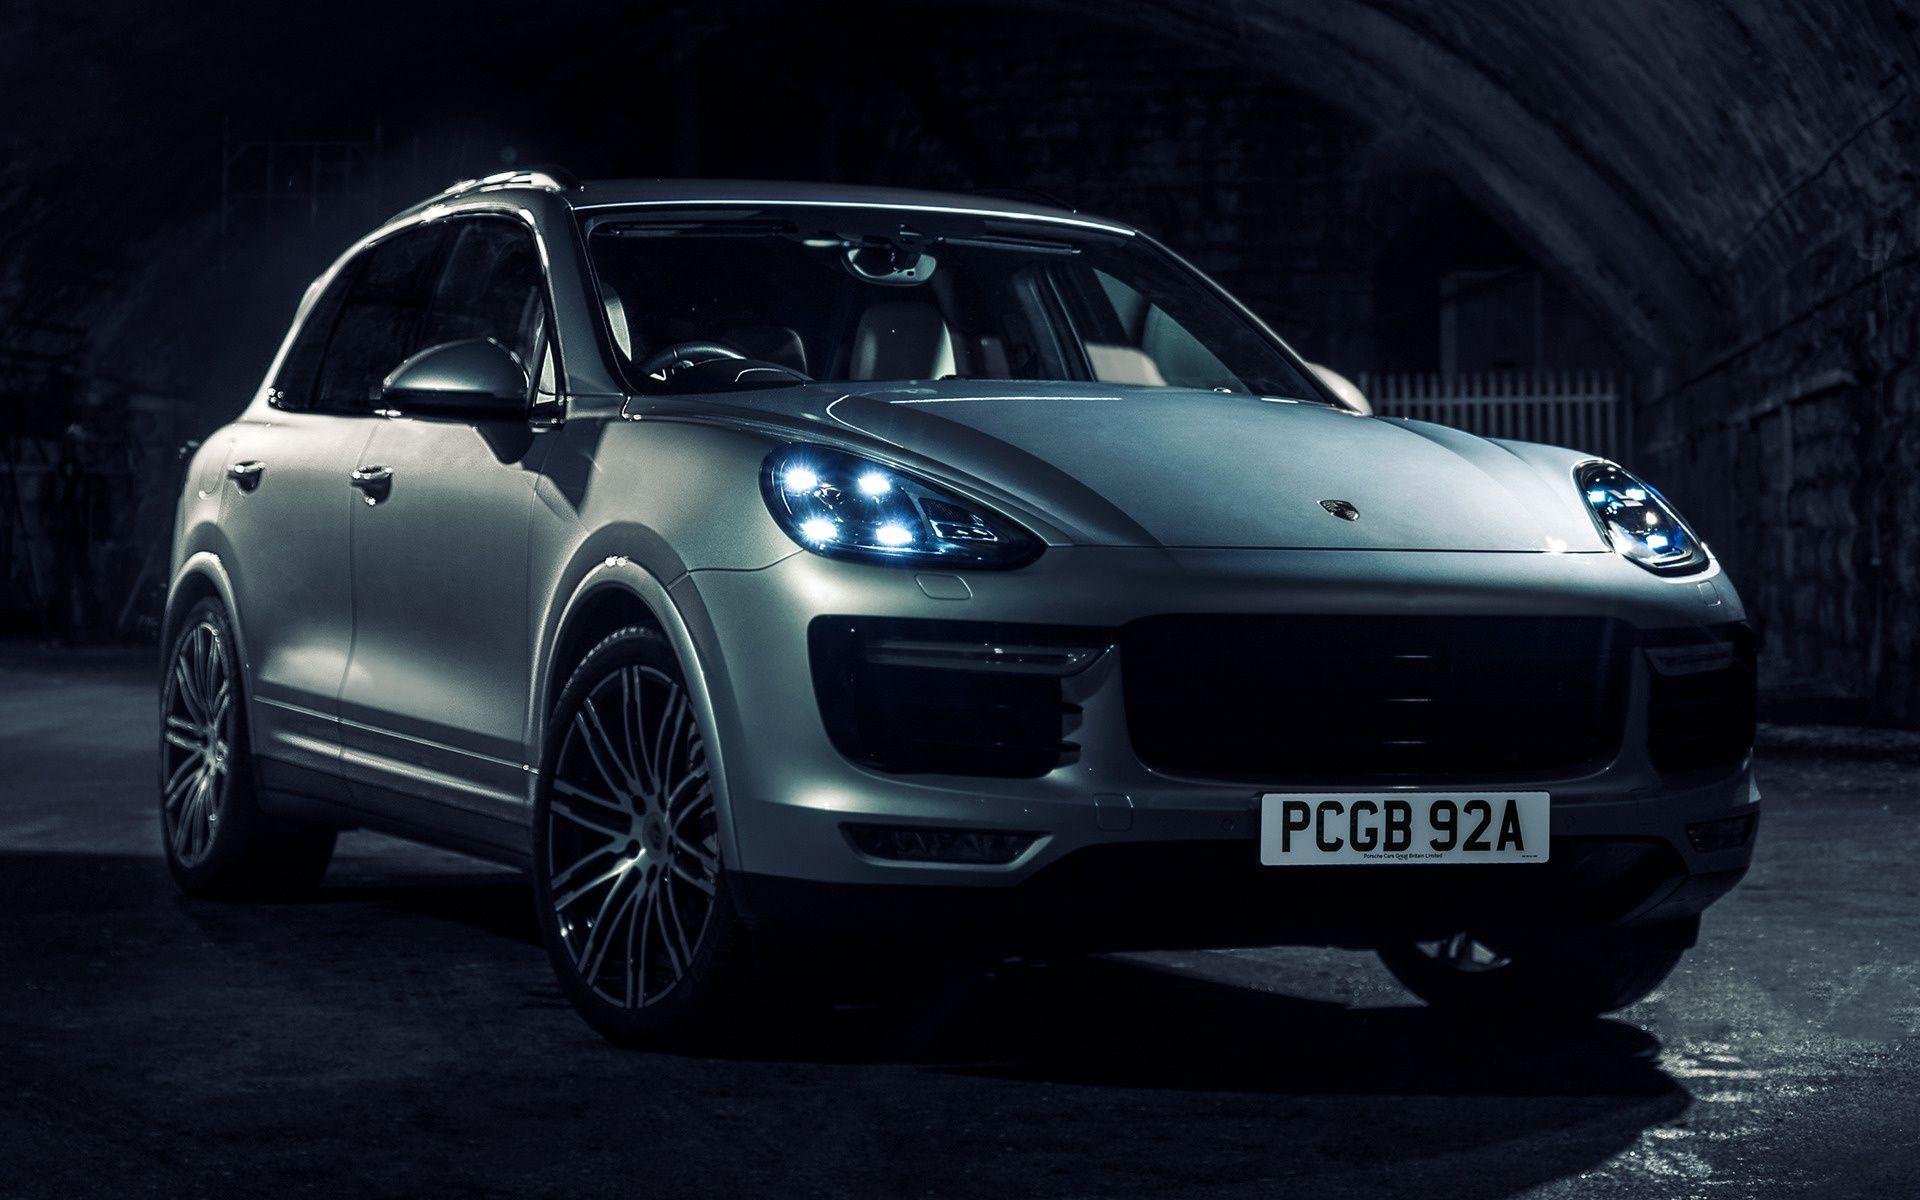 Porsche Cayenne Turbo S (2015) UK Wallpaper and HD Image